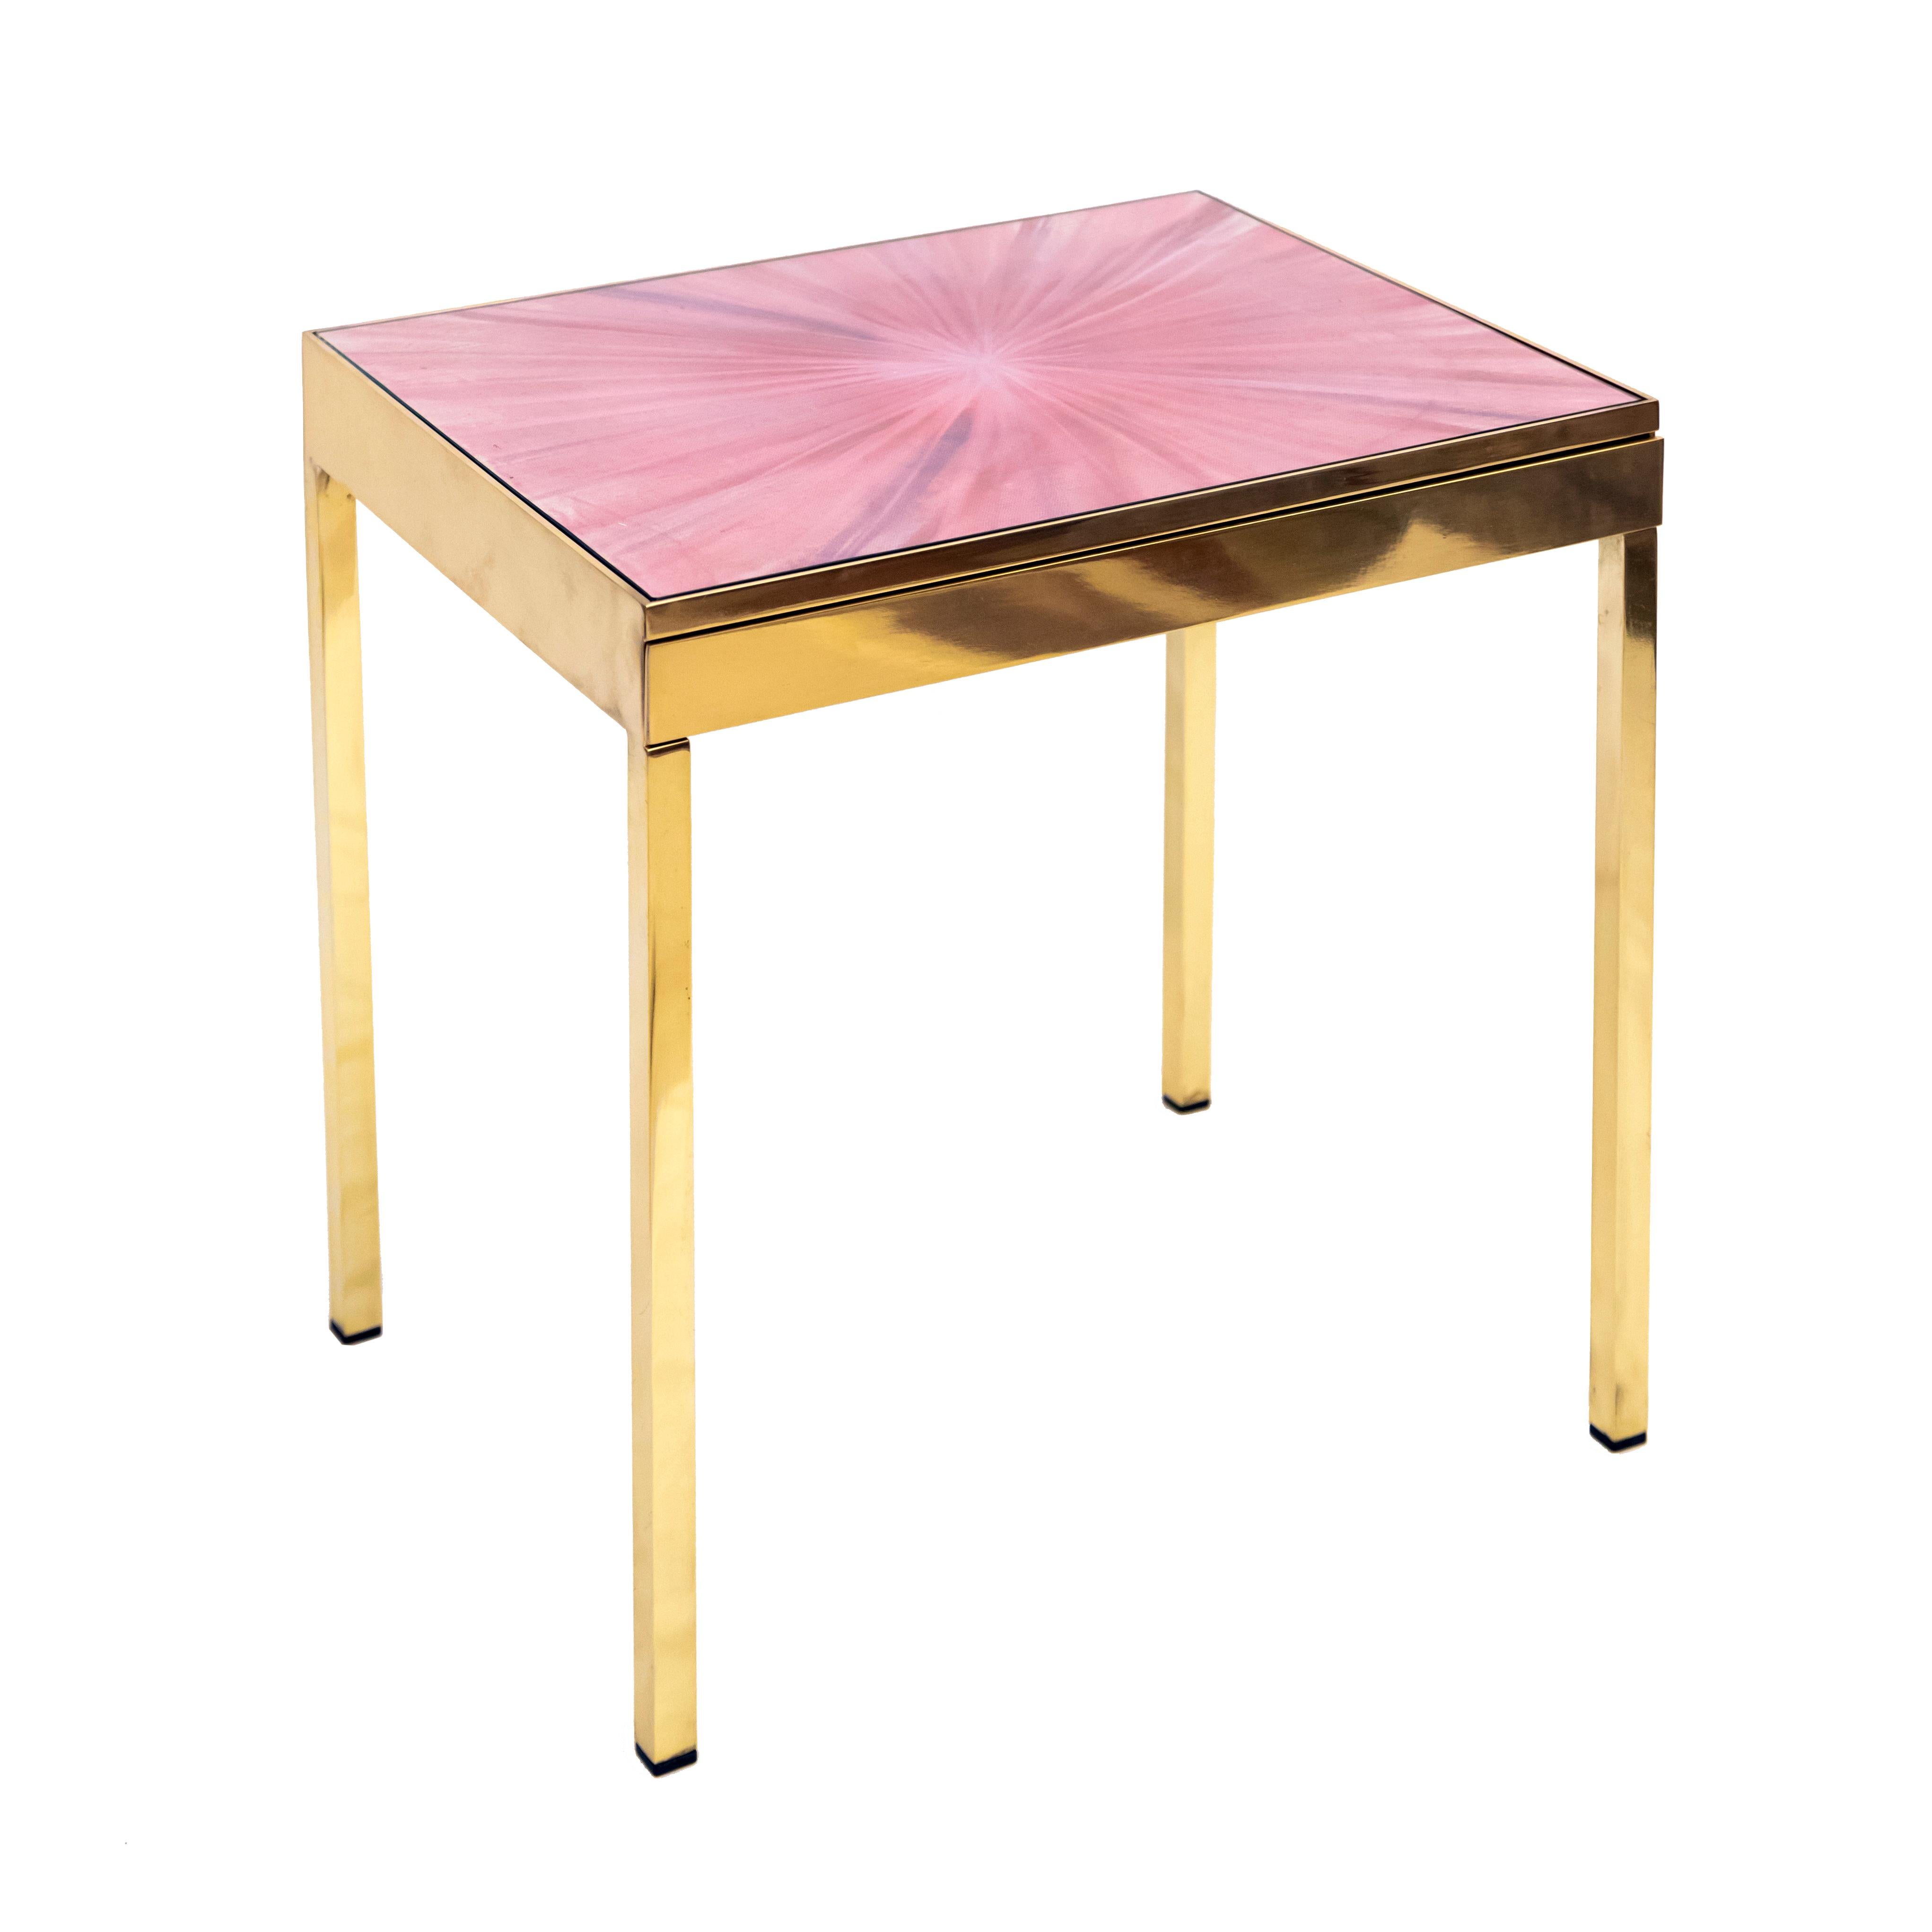 Each table is a unique piece with a hand painted top by Allegra Hicks.
Drawer dimension: W 44.7 x D 37cm x H 4cm.